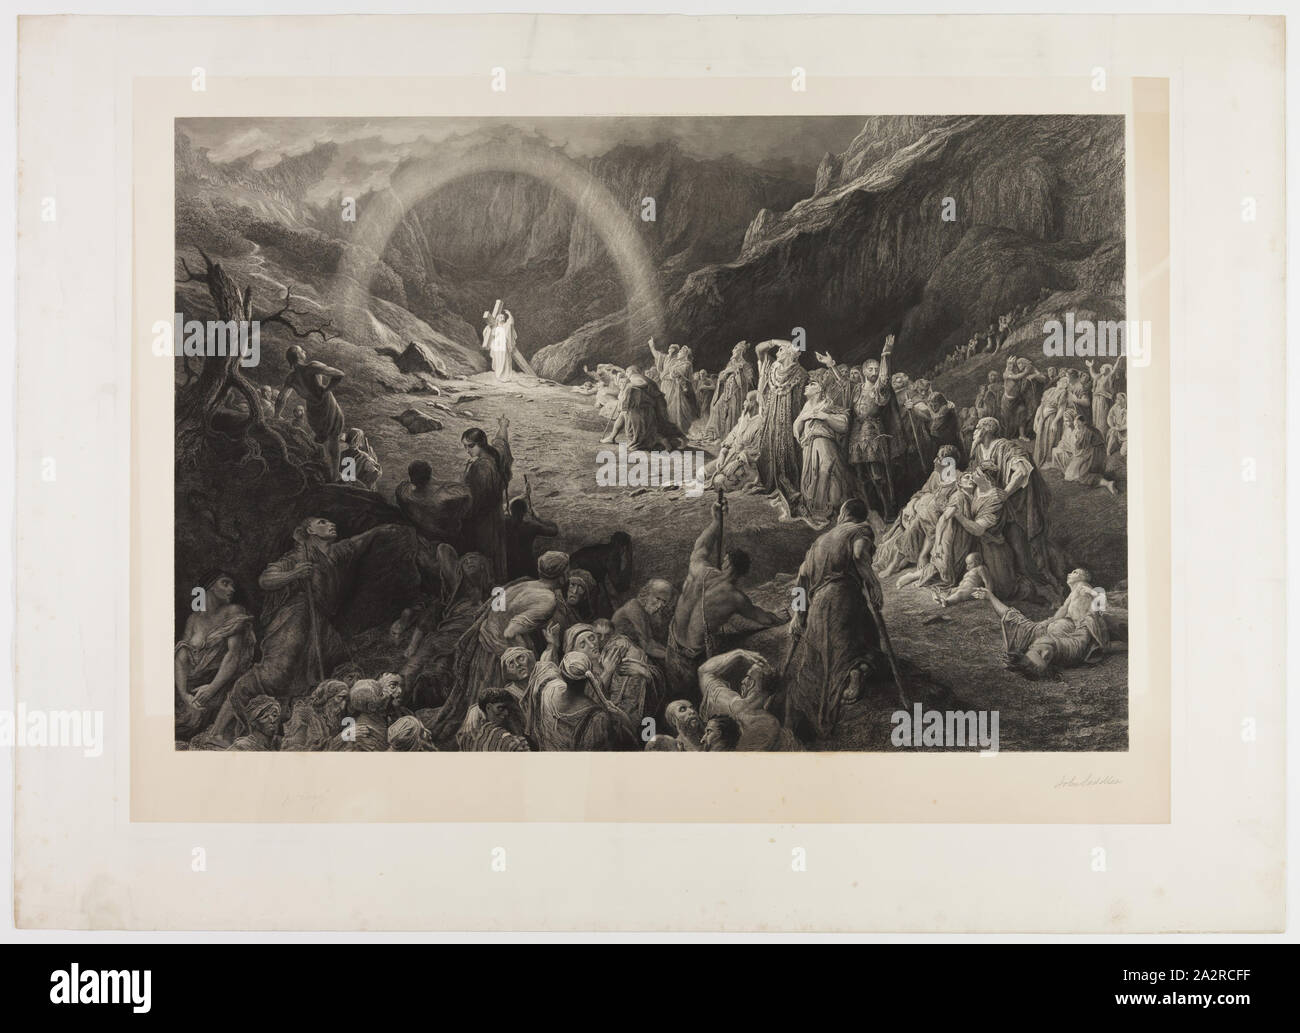 John Saddler, English, 1813-1892, after Gustave Doré, French, 1832-1883,  The Vale of Tears, 1890, Engraving printed in black on chine colle, image:  22 1/8 x 33 in Stock Photo - Alamy